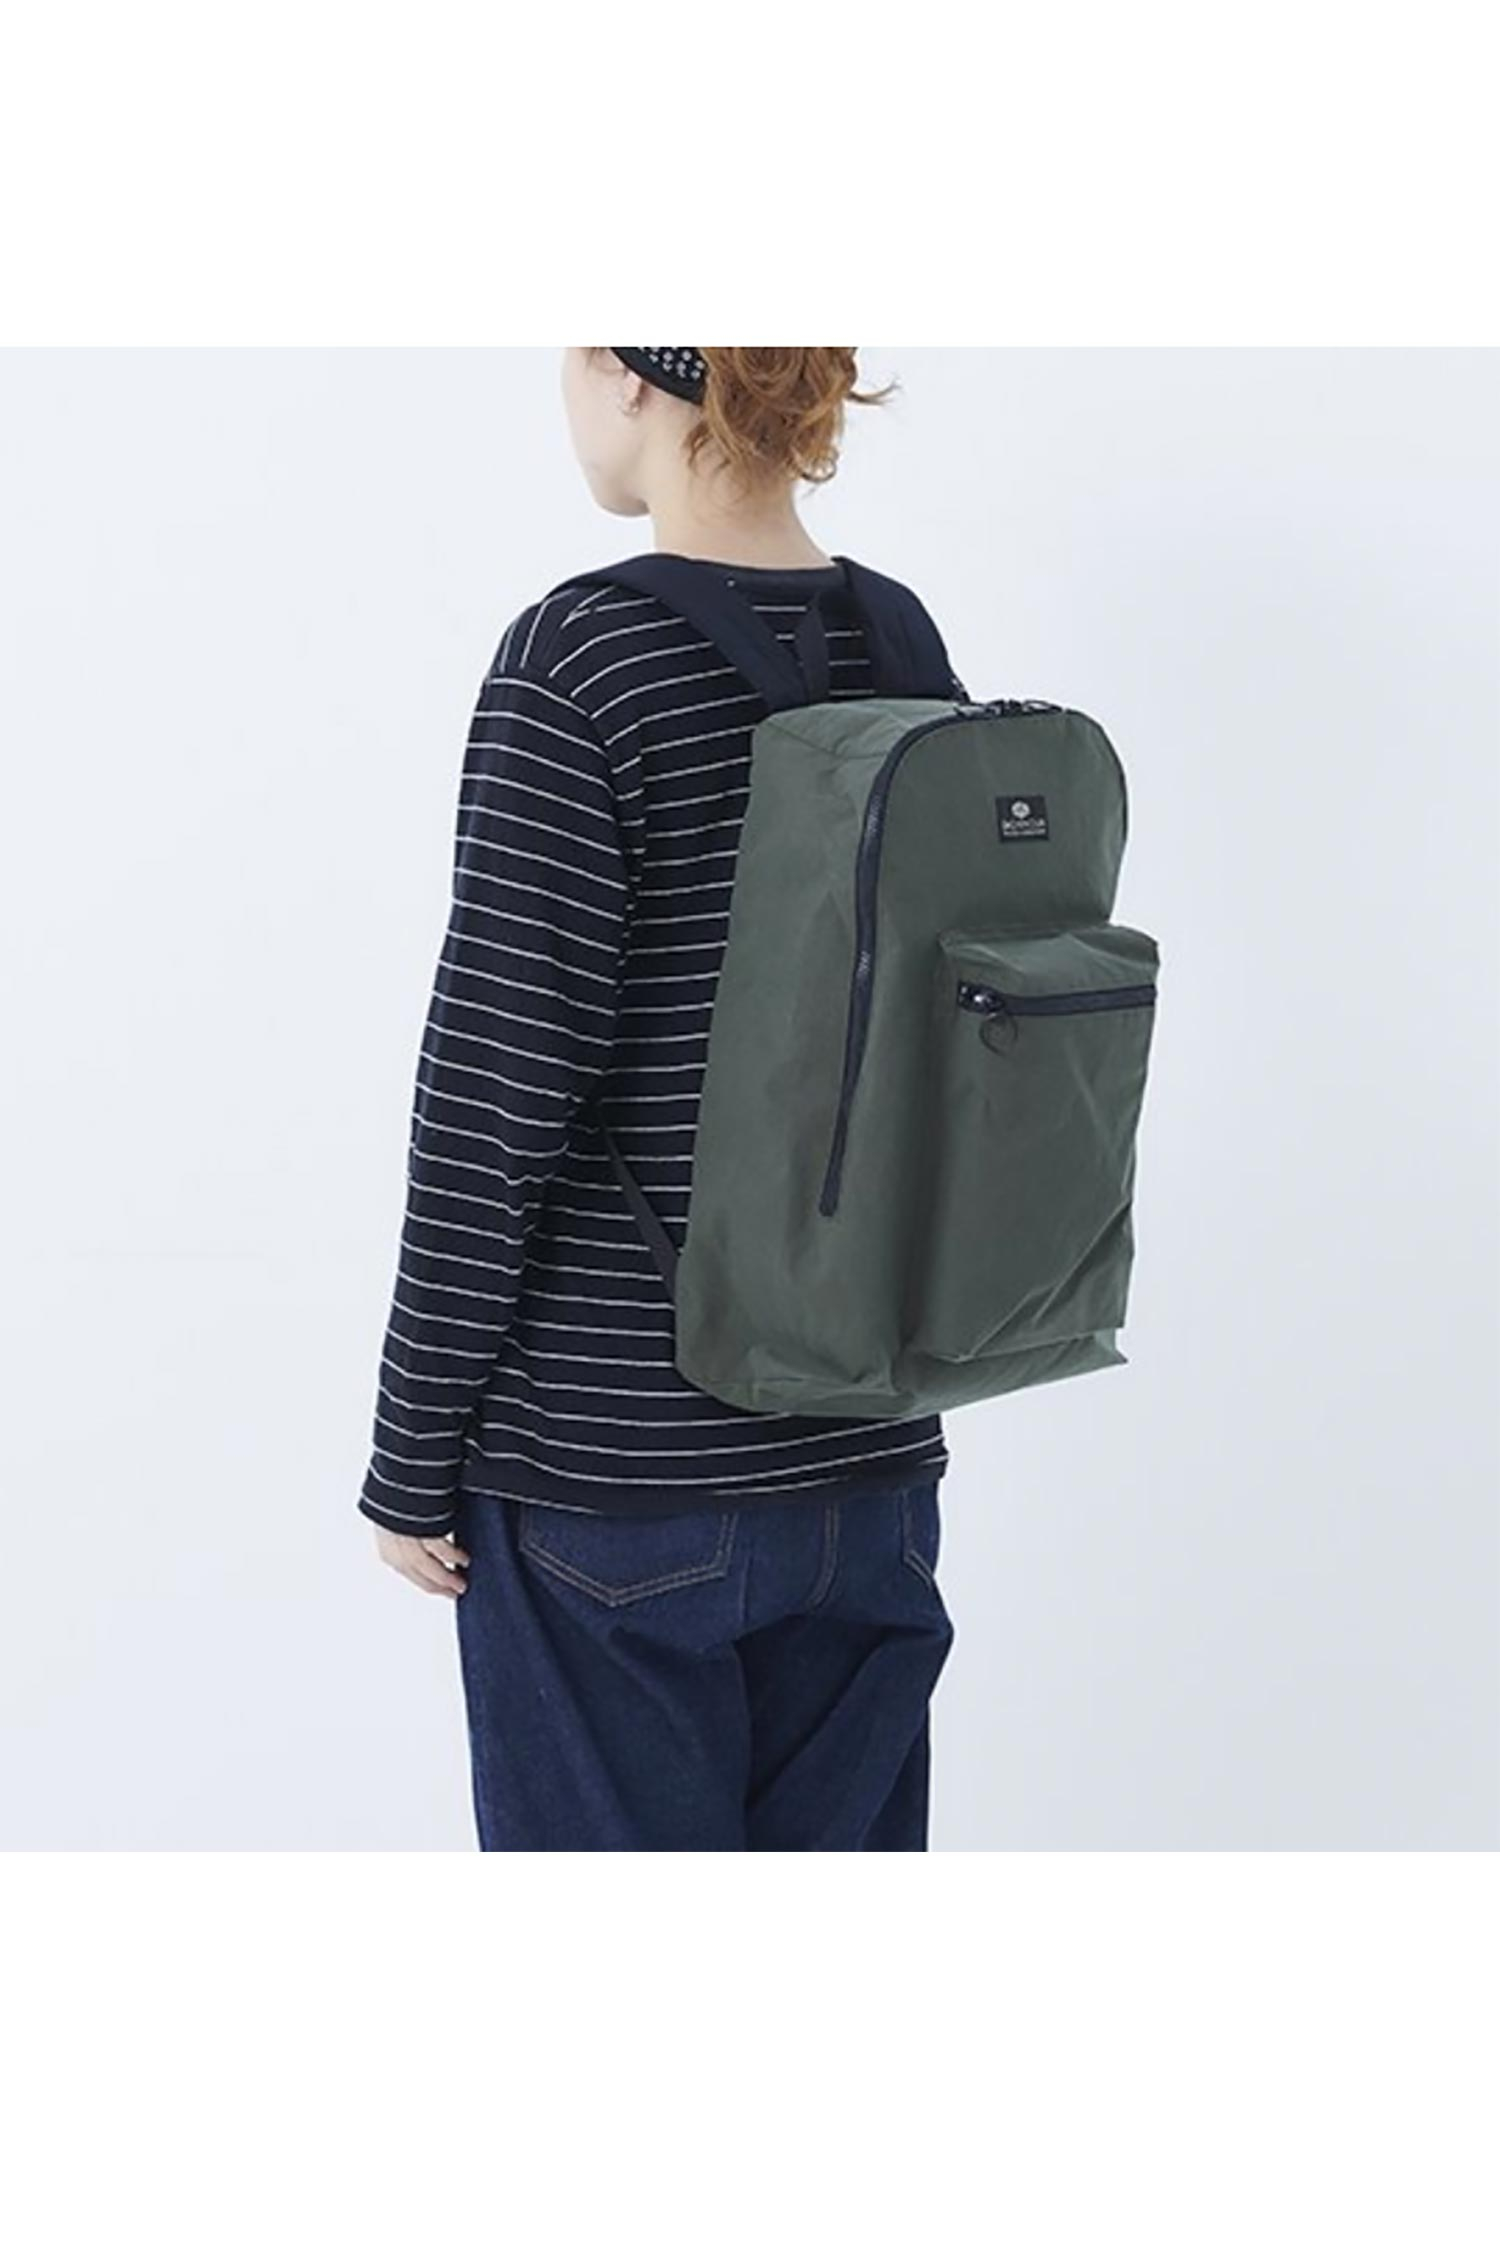 Bag n Noun Ultra Light Day Pack L, Olive OOID Store, CHF 259.00